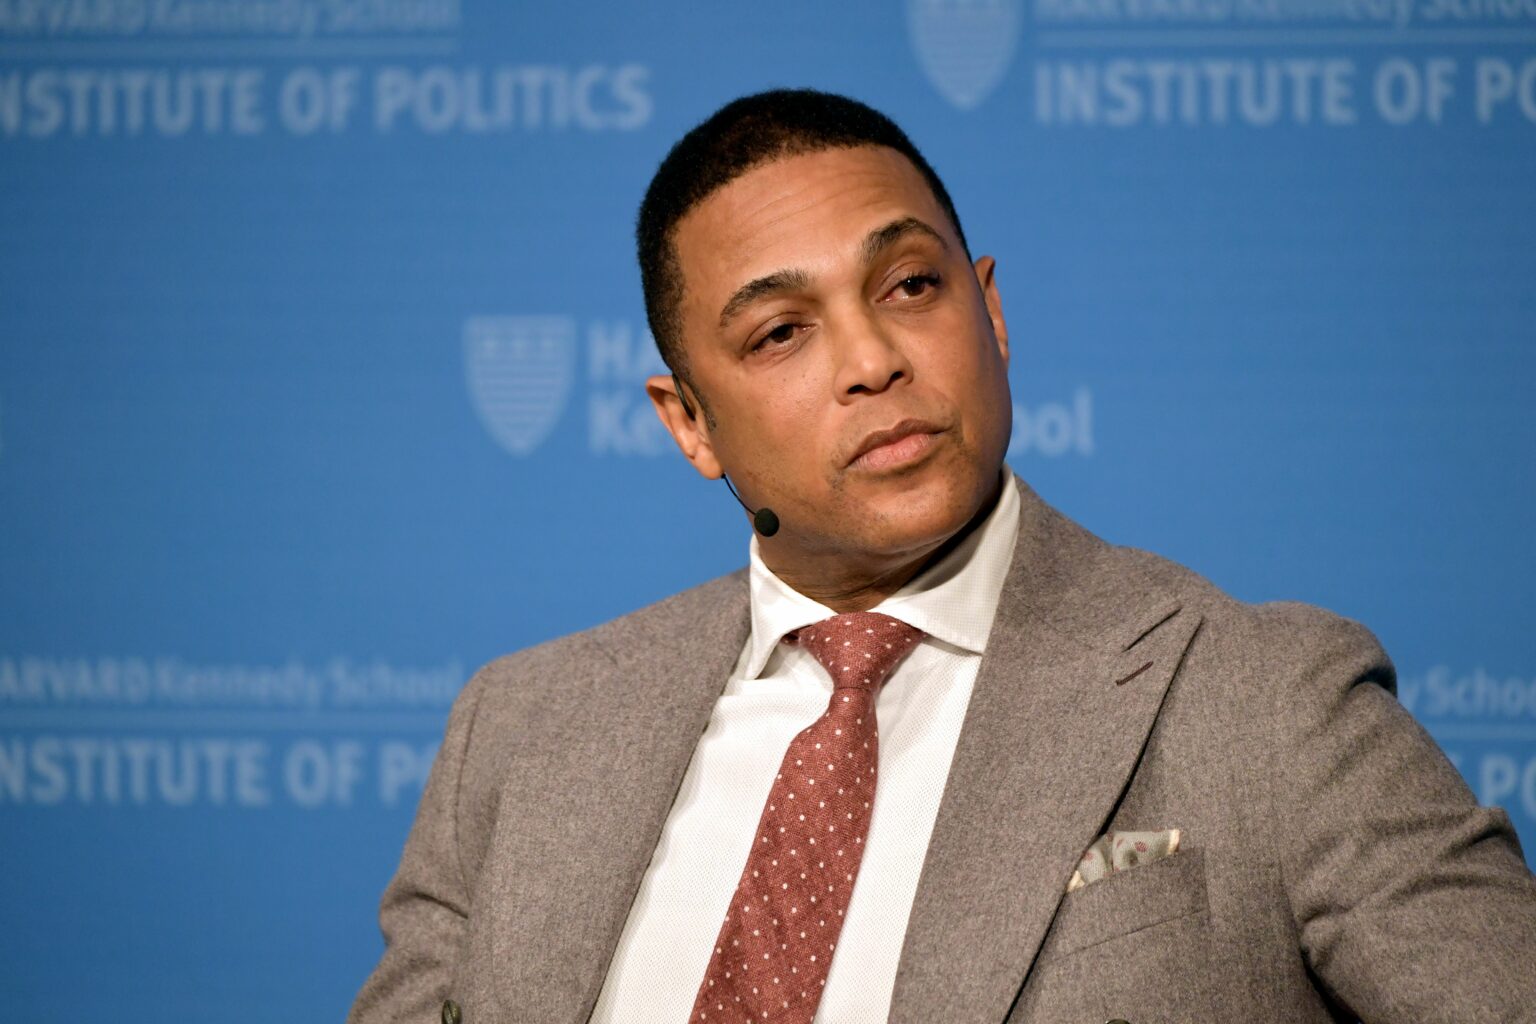 Uncovering Don Lemon's Educational Background: What Did He Study?